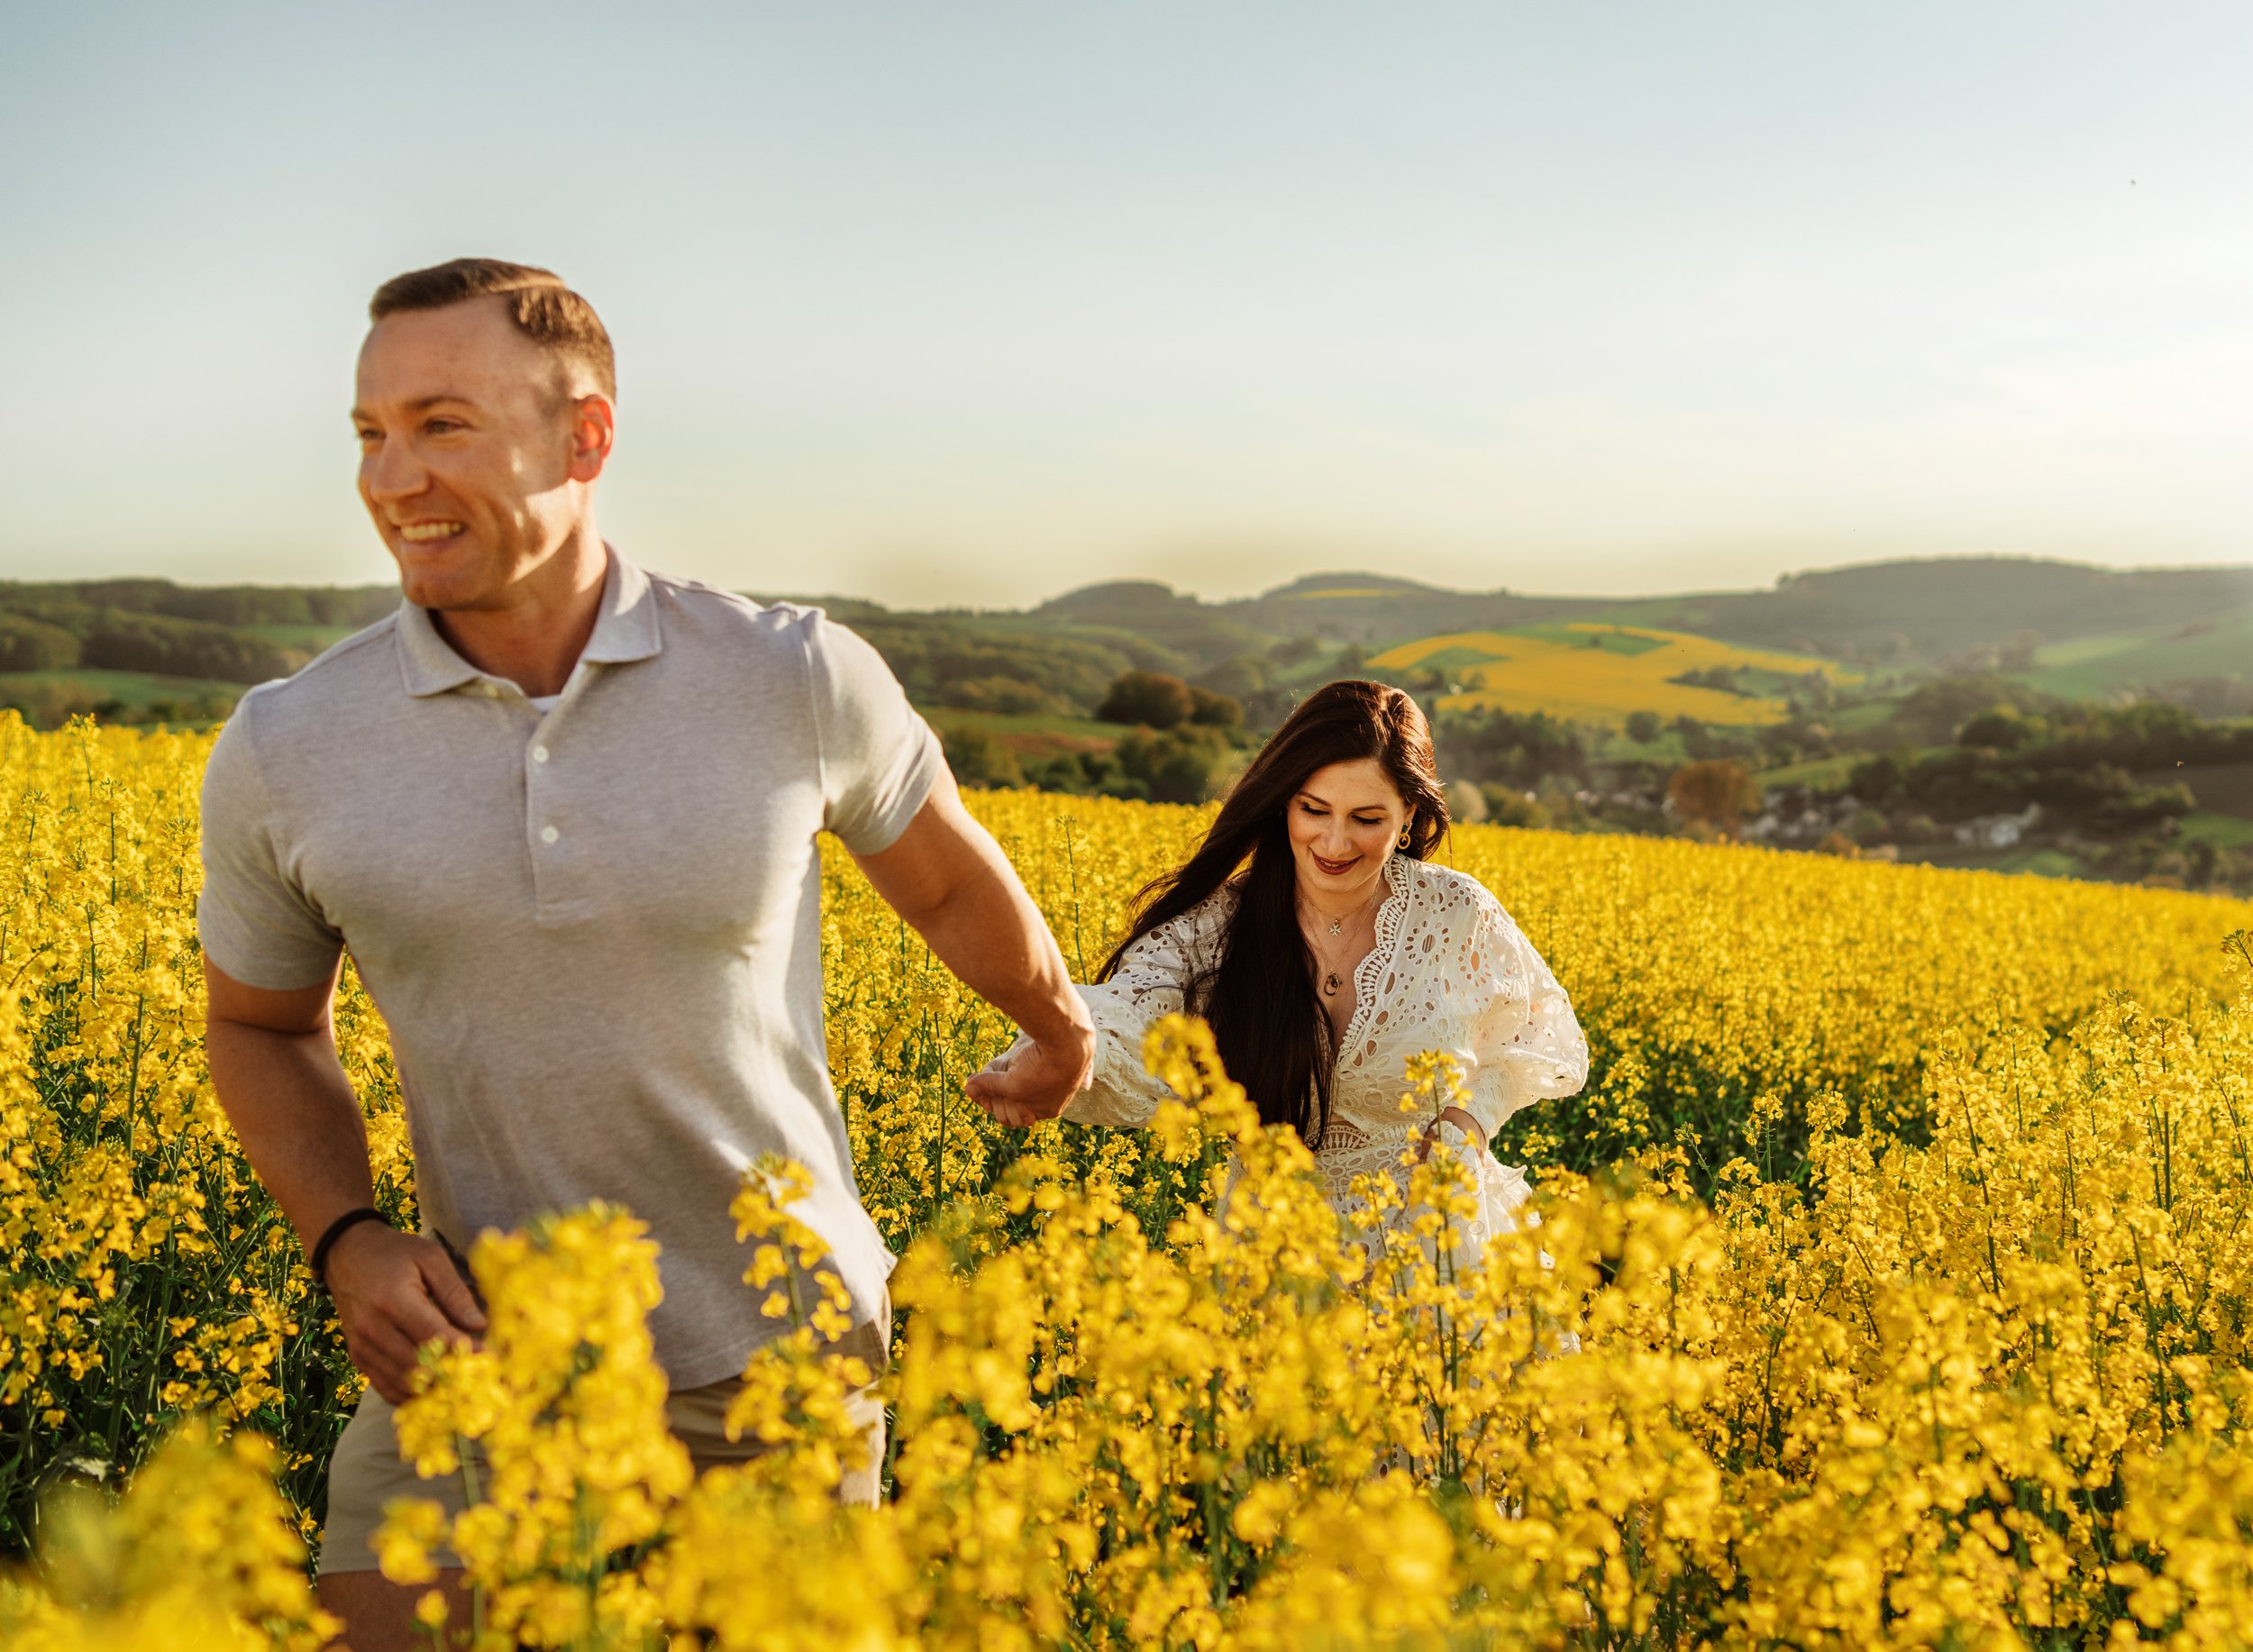 emotive-engagement-photo-session-in-yellow-flower-fields-in-ramstein-germany-by-sarah-havens (2).jpg